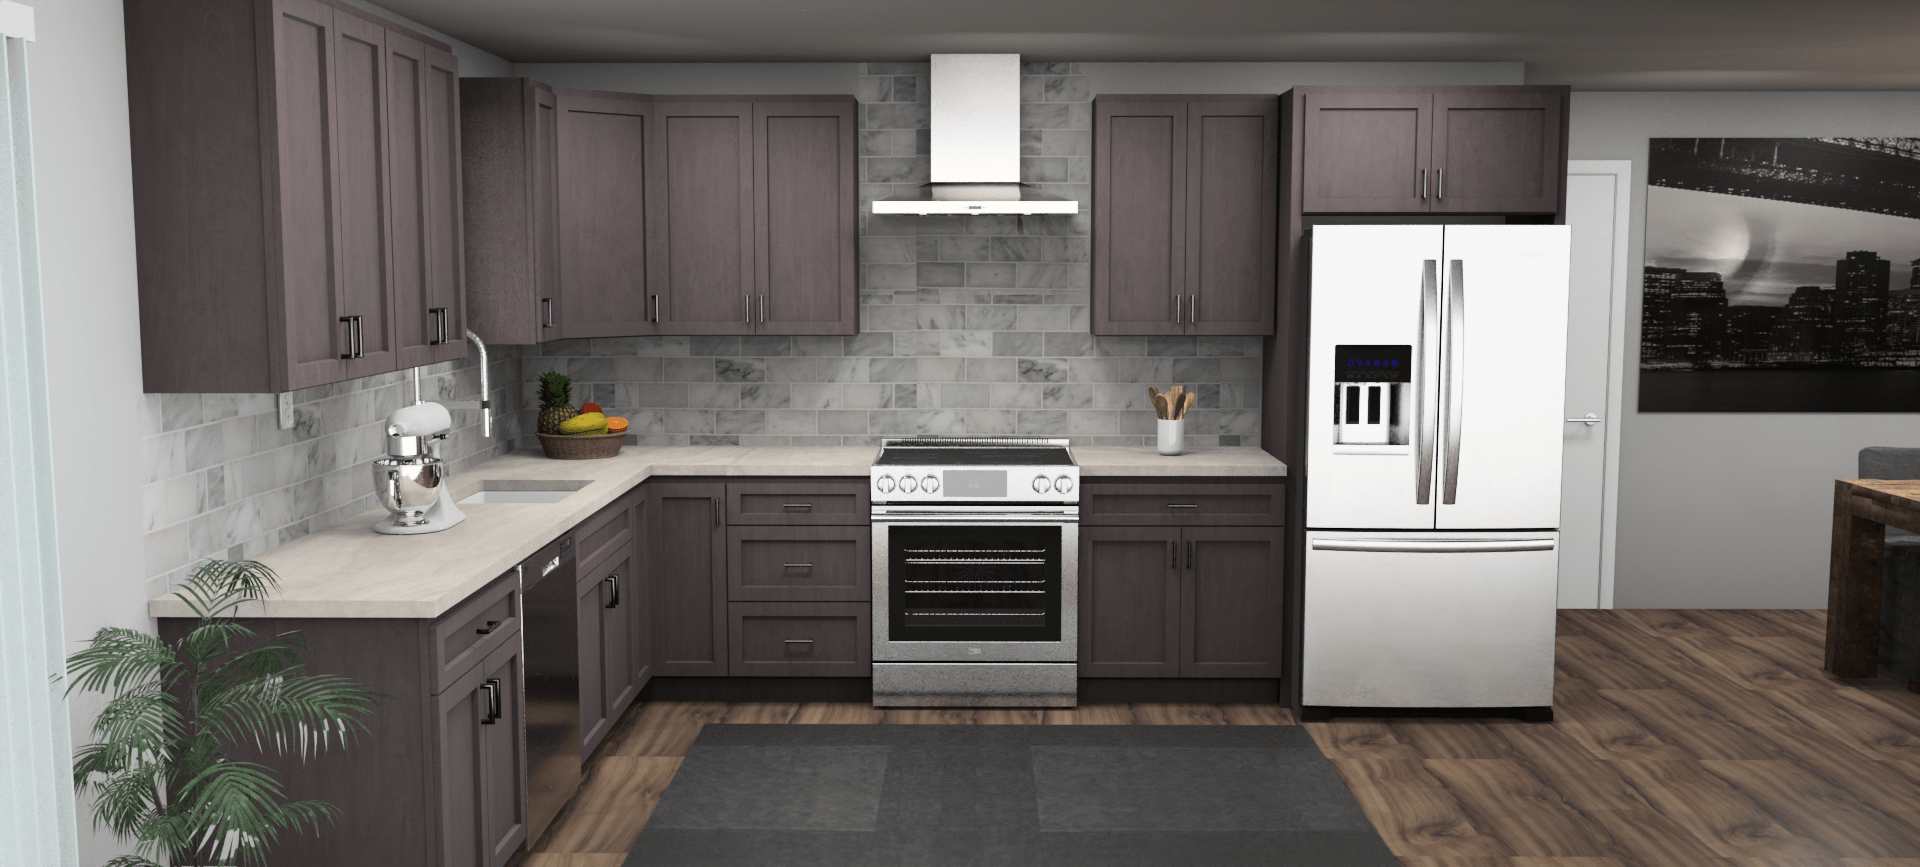 Pioneer The Cinder Grey 10 x 13 L Shaped Kitchen Front Layout Photo